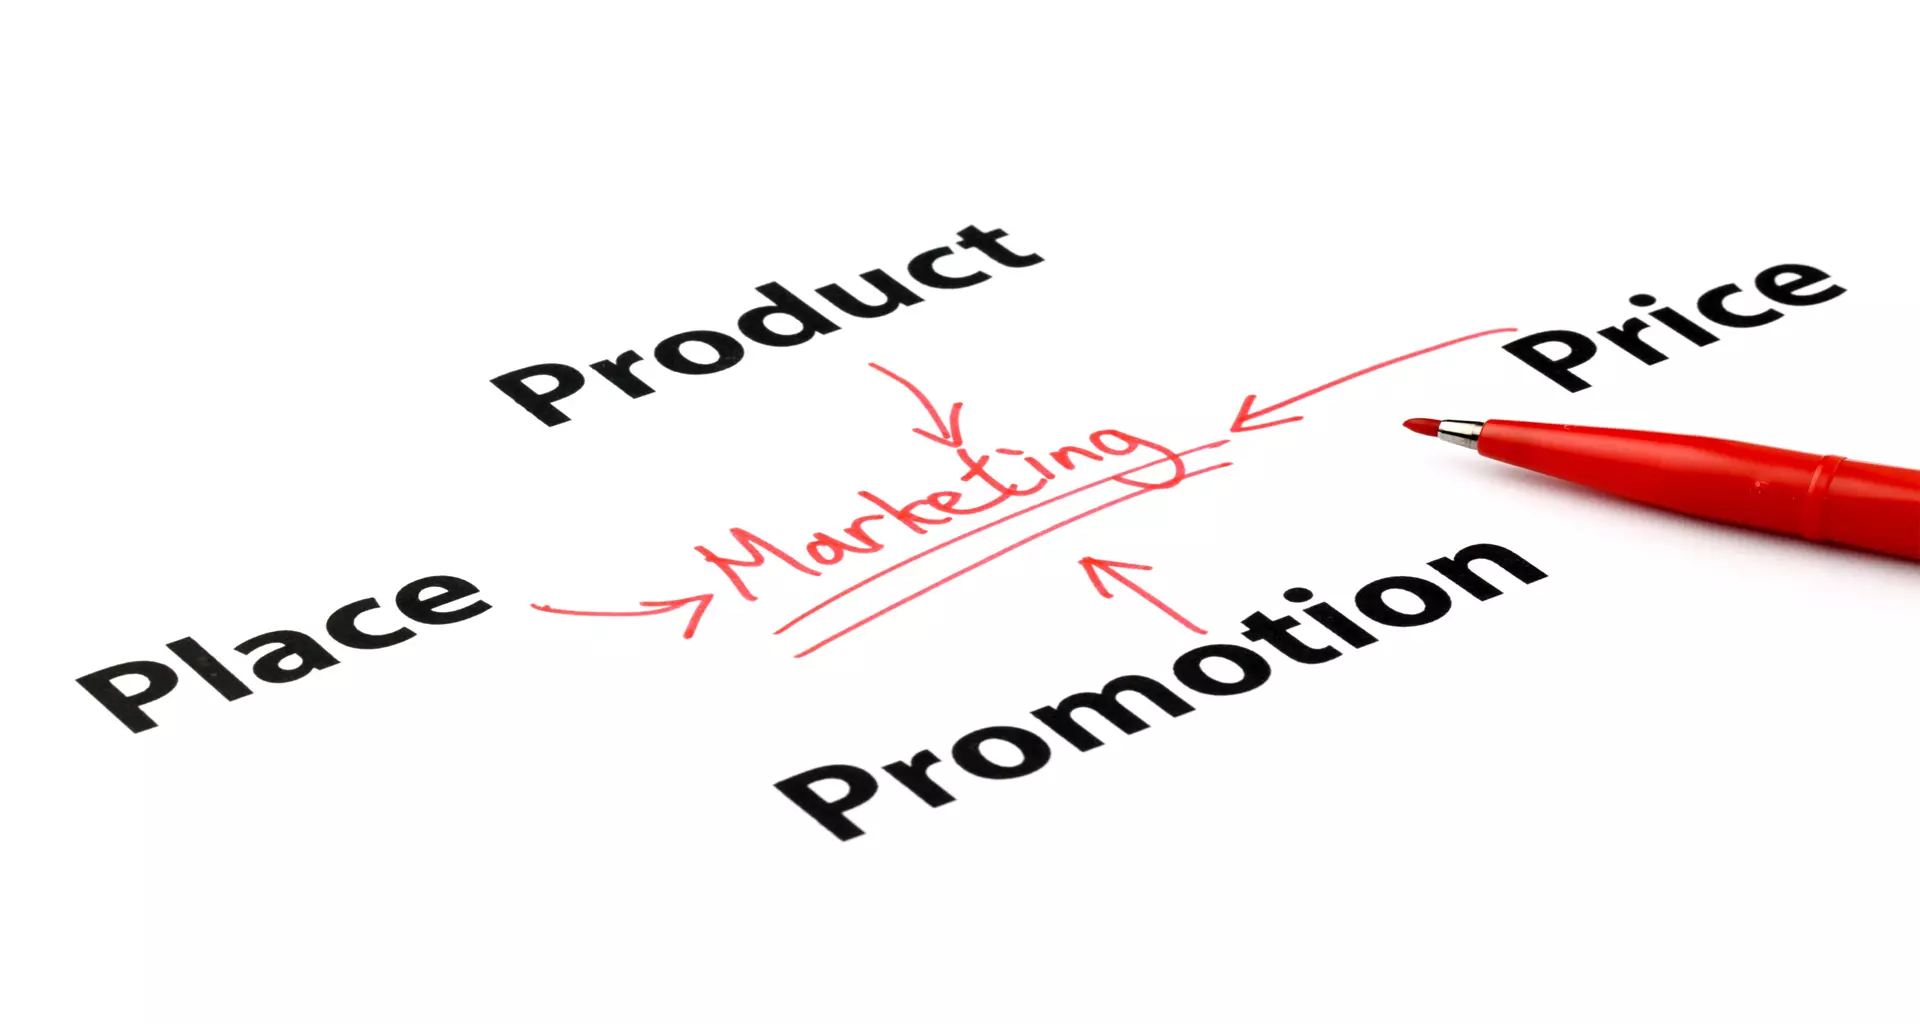 The-words-Product- Price-promotion-and- Place-pointing -to-the- word-marketing- highlighted-in-red